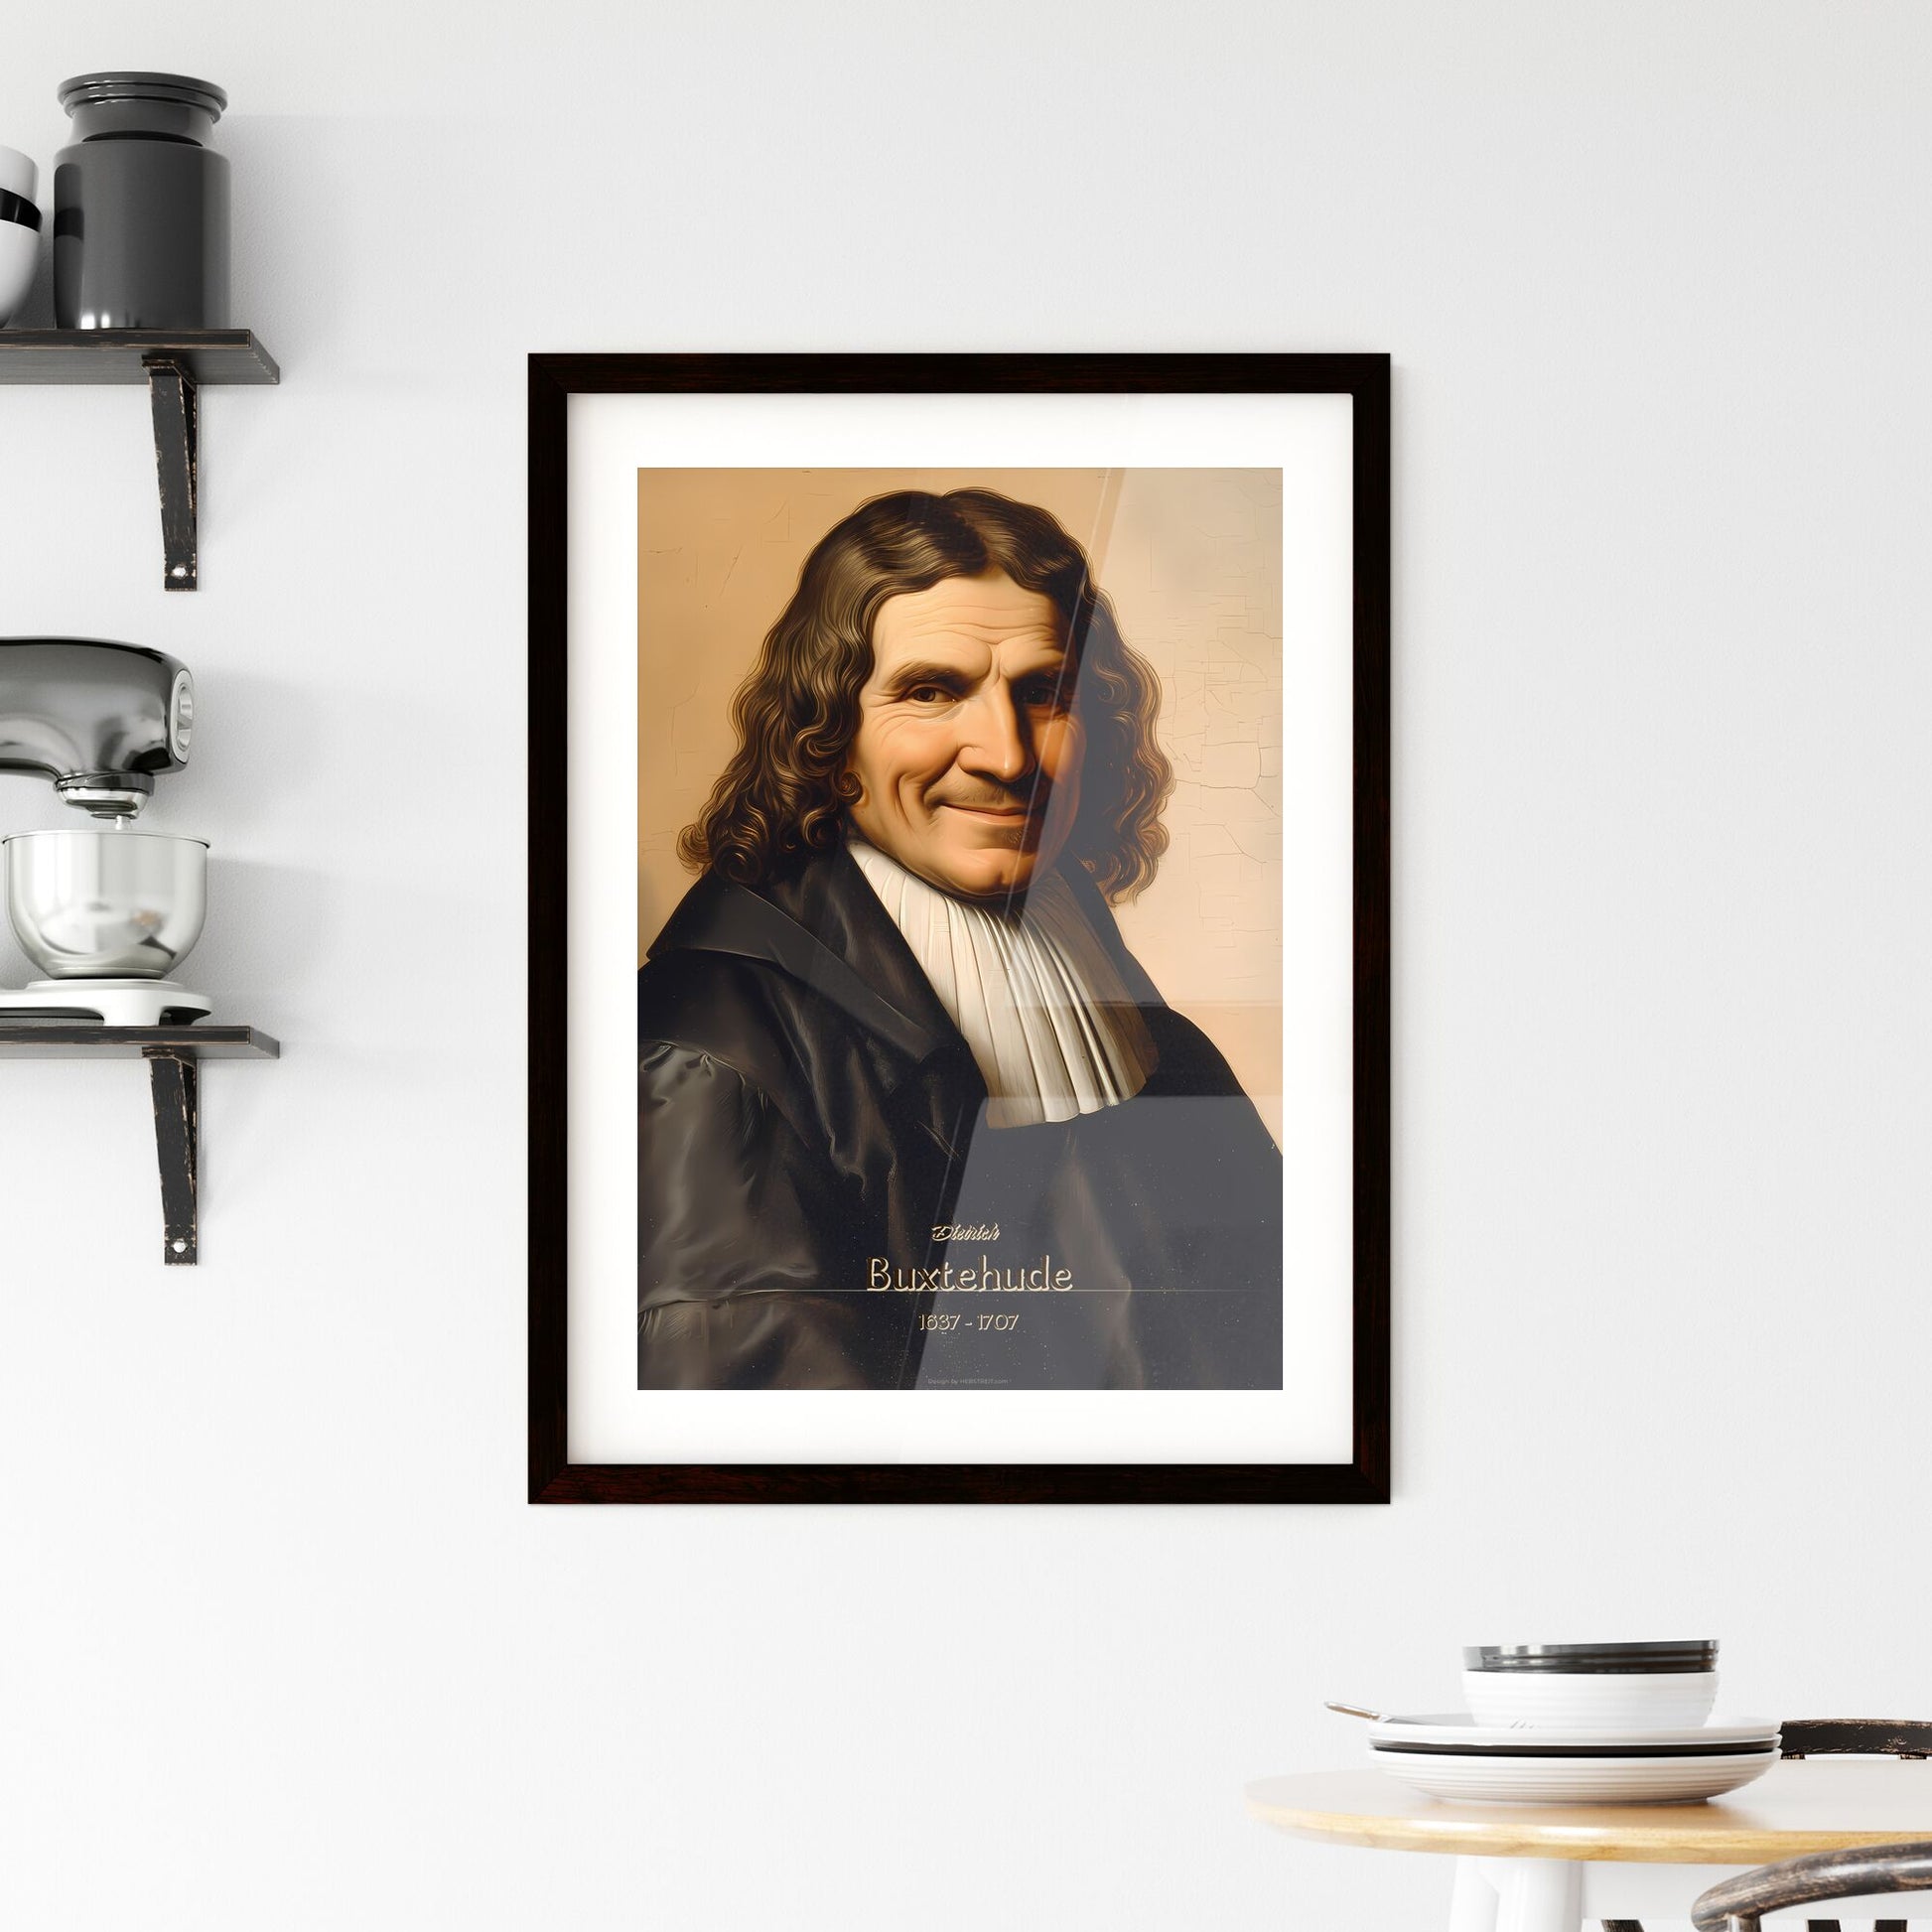 Dietrich, Buxtehude, 1637 - 1707, A Poster of a man with long curly hair wearing a black robe Default Title